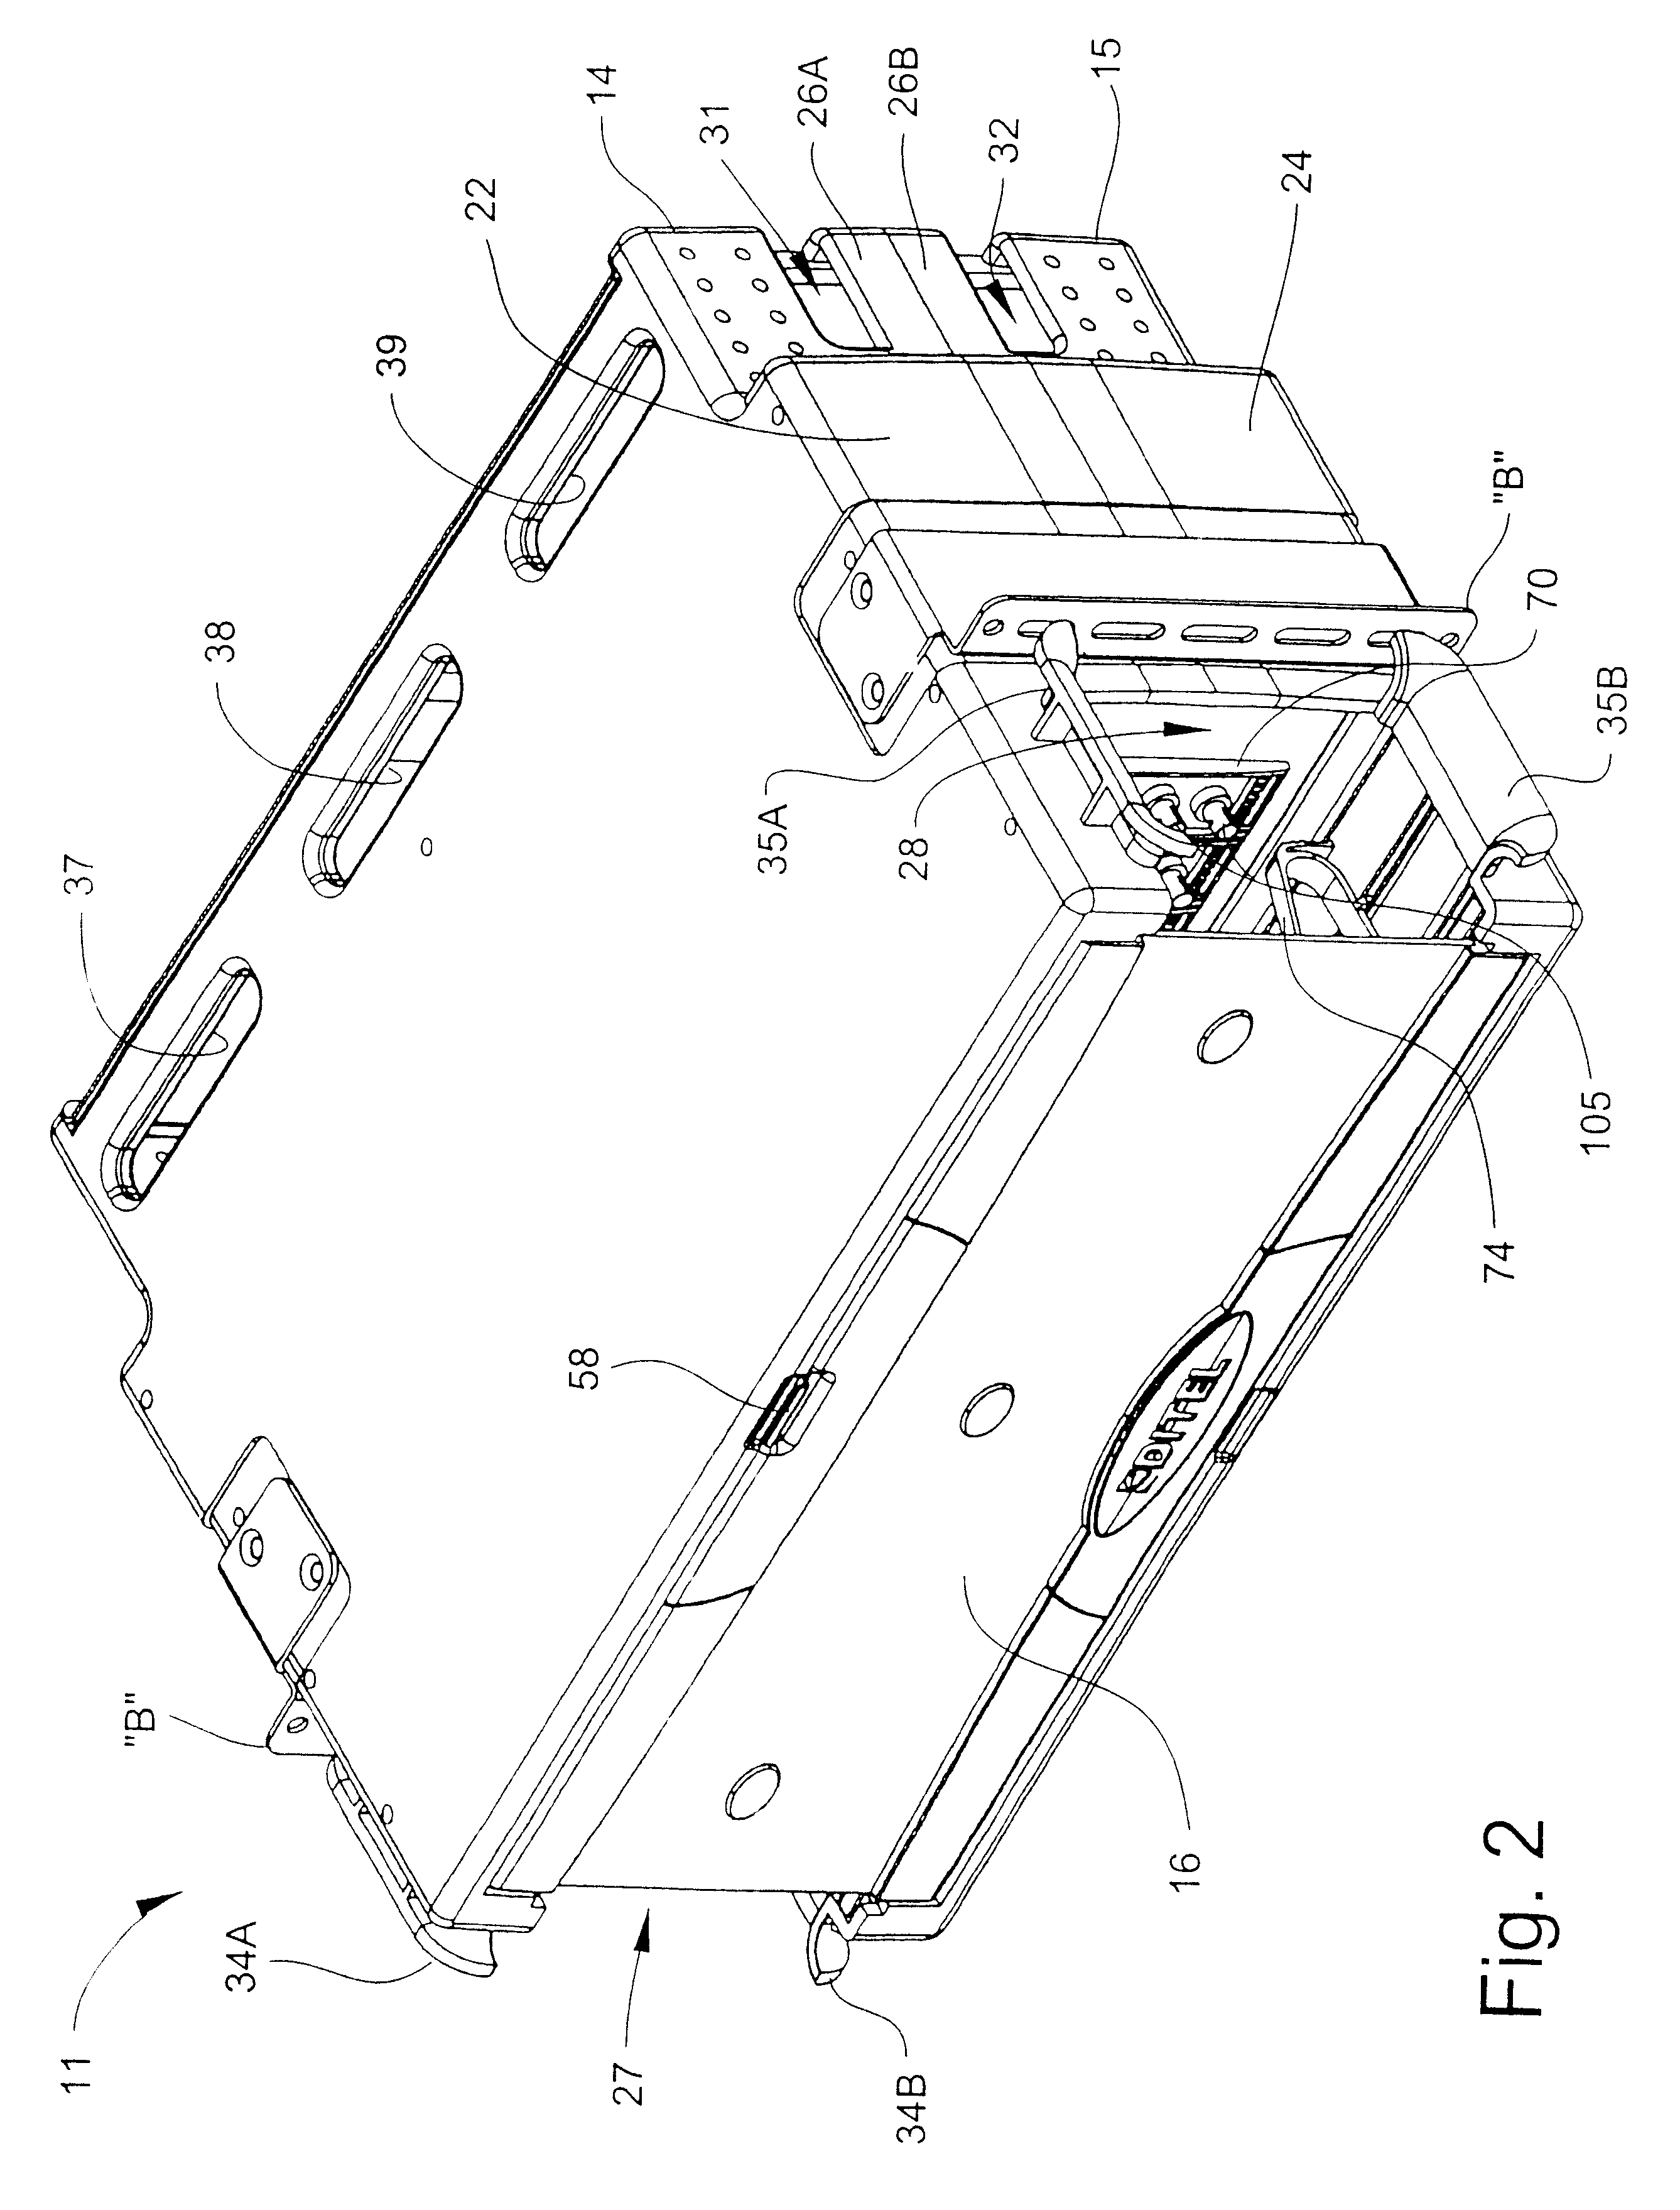 Cable connector plate and method for interconnecting ends of fiber optic cable